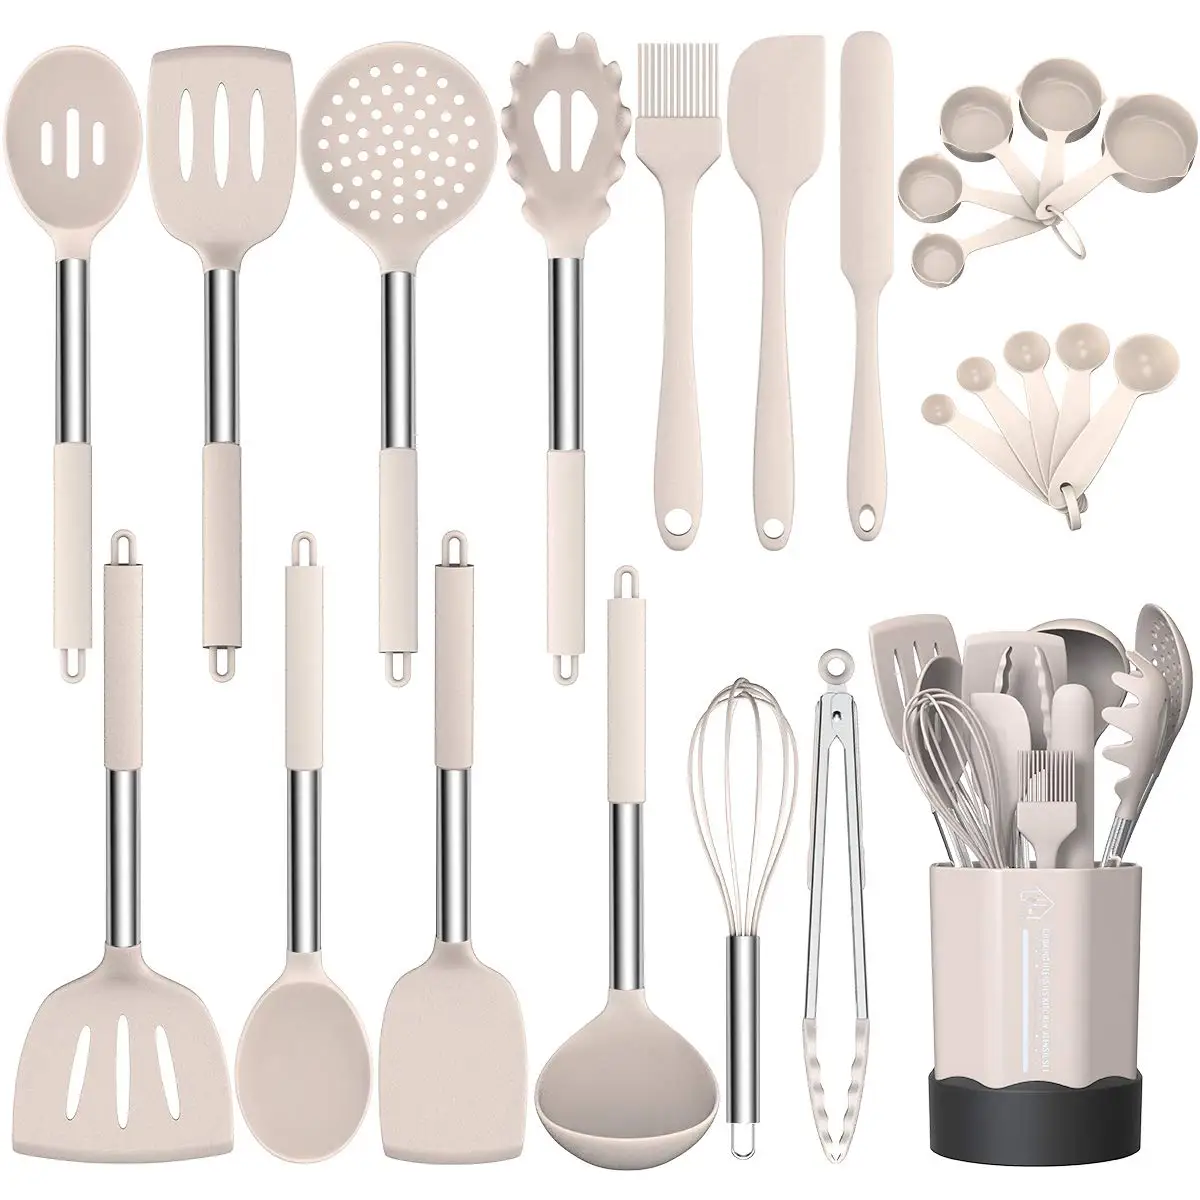 Heat Resistant Silicone Cooking Utensil Set 24 Piece Silicone Support For Spoon And Utensils